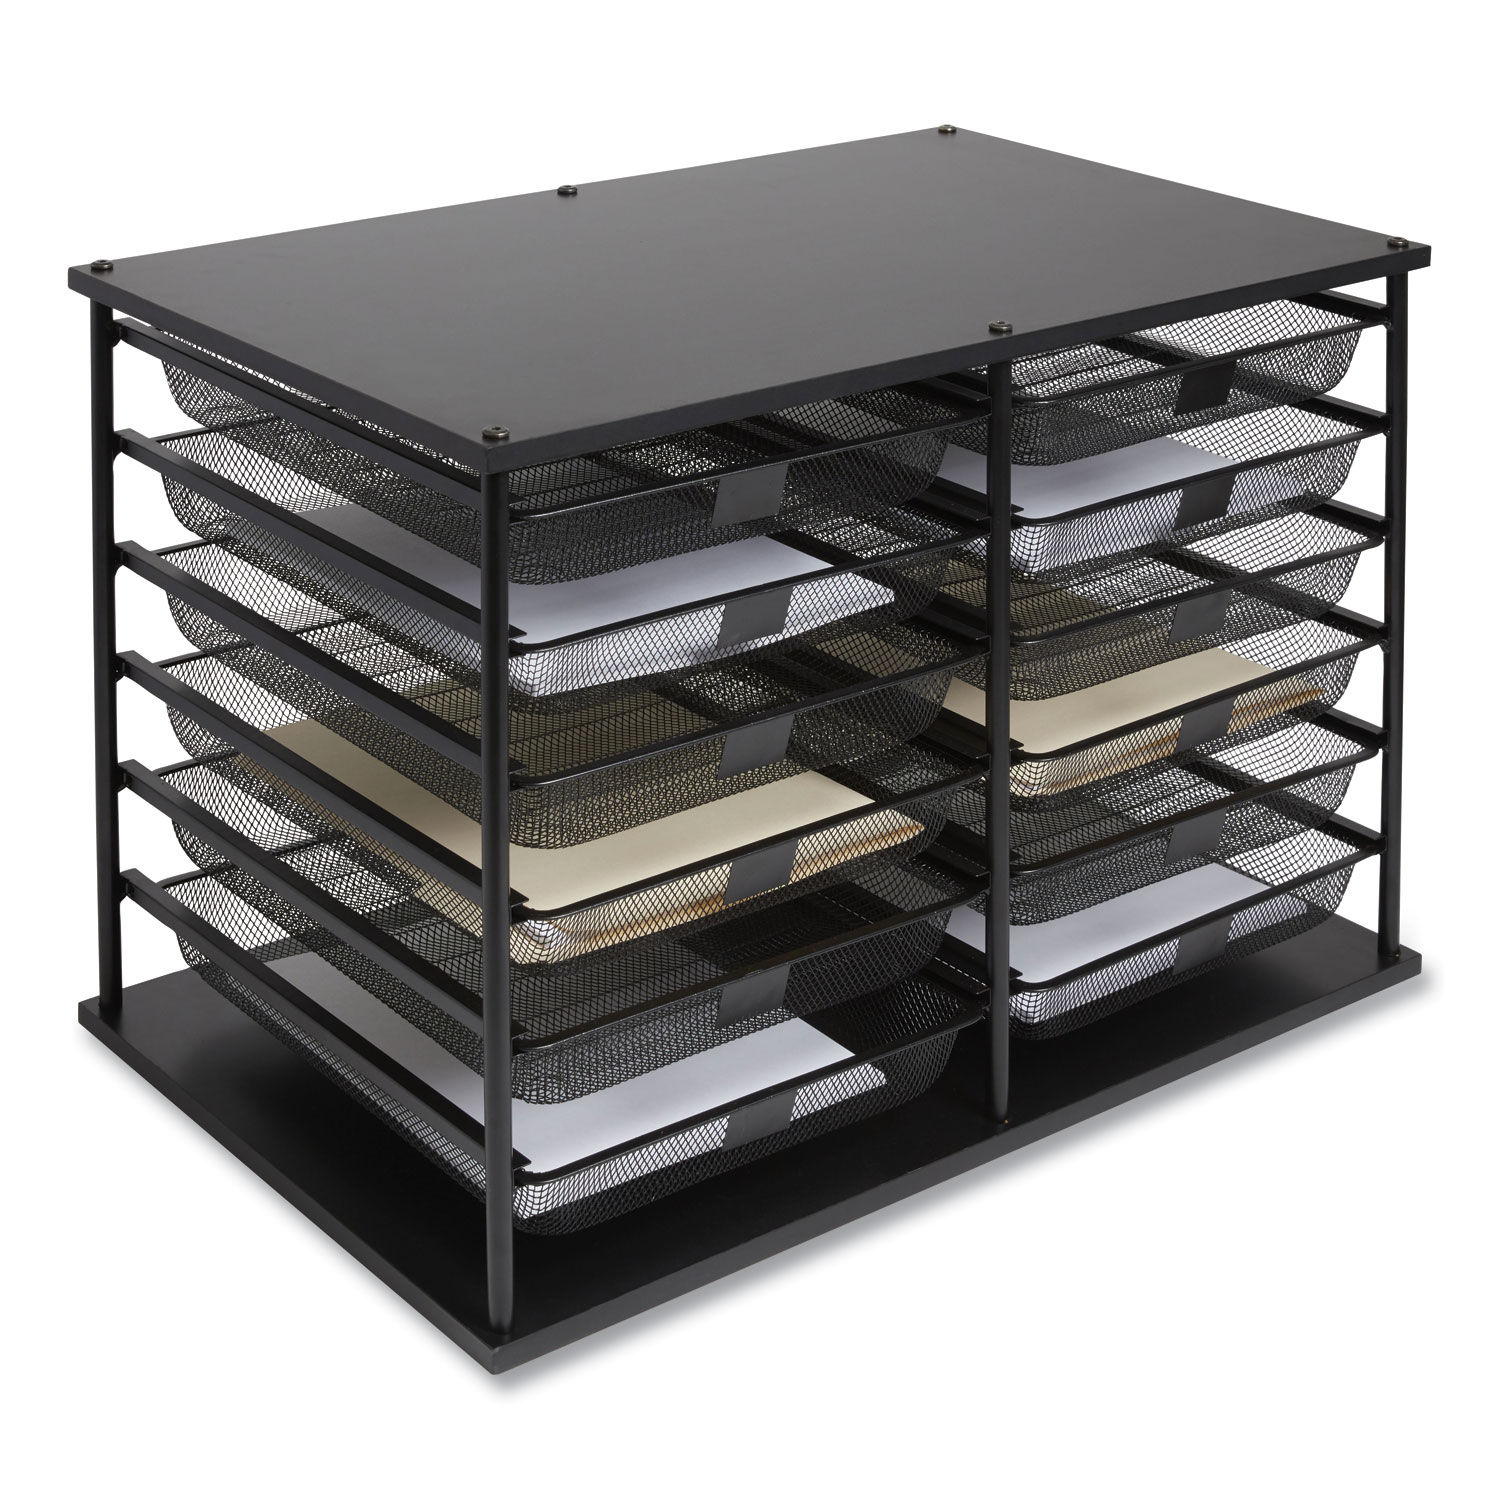 4 Compartment, Black Metal Mesh Document and File Organizer Rack